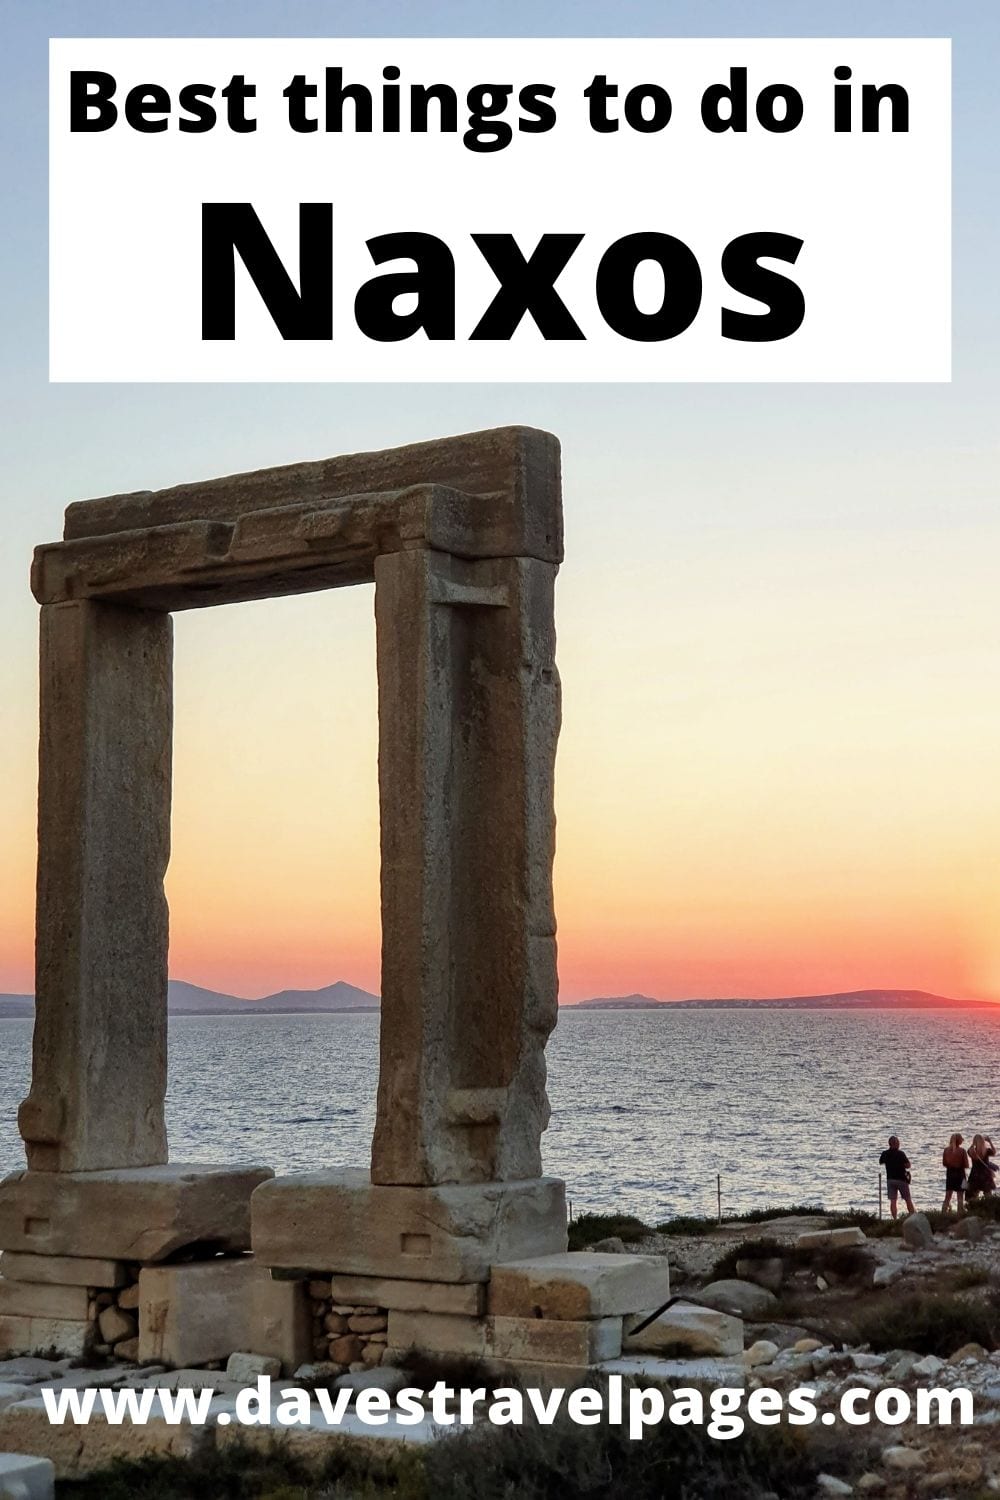 Dave's Travel Tips For Naxos